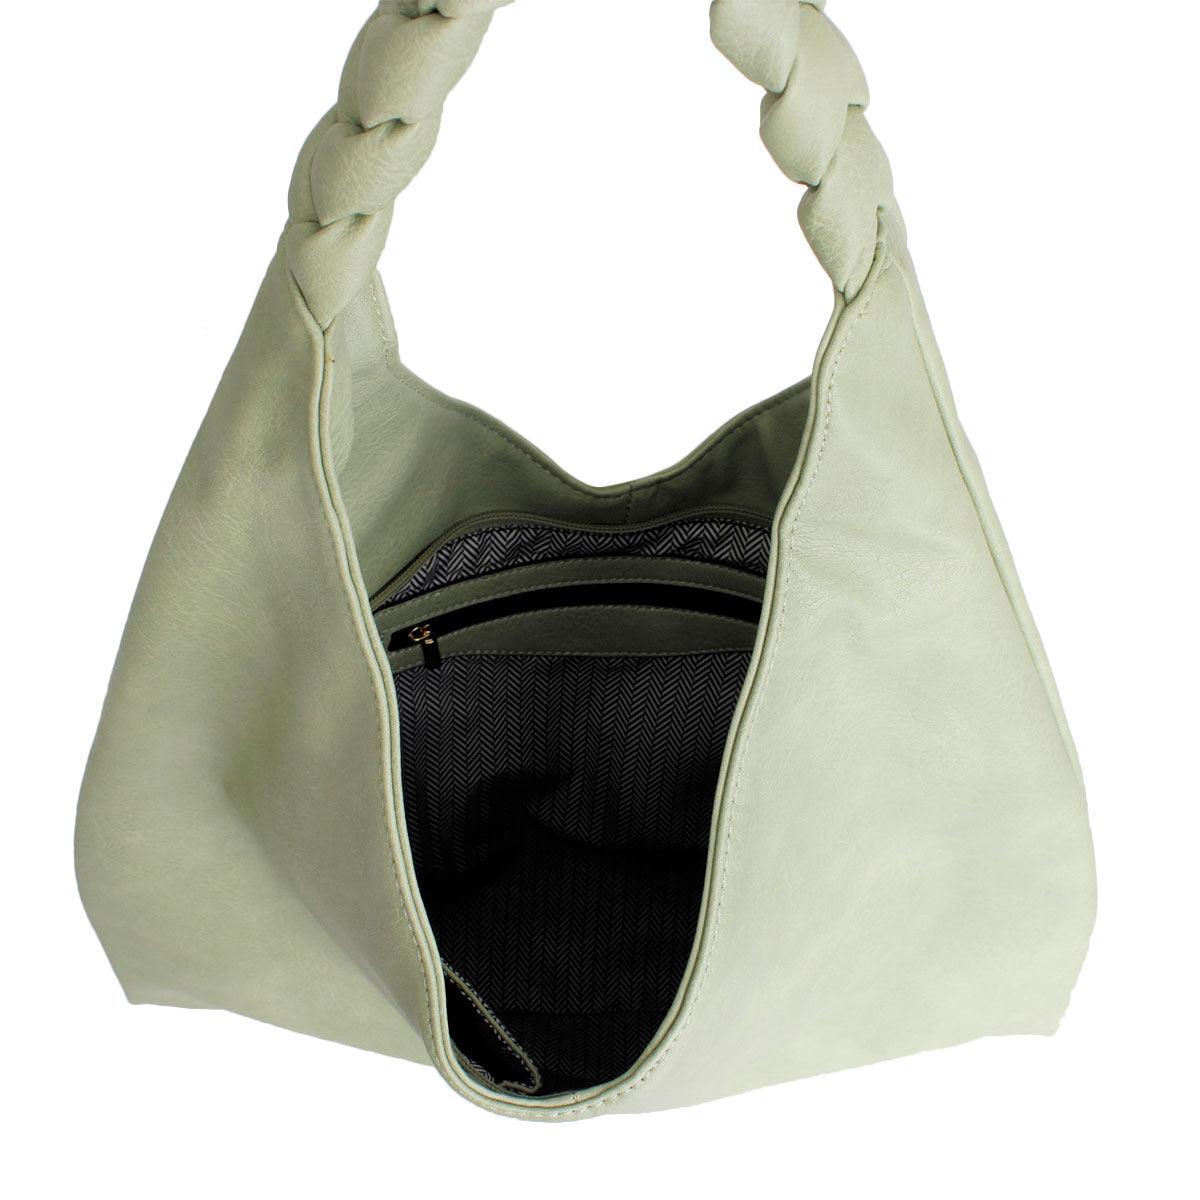 Stylish Green Vegan Leather Hobo Bag: Perfect Mix of Fashion and Function for Everyday Use